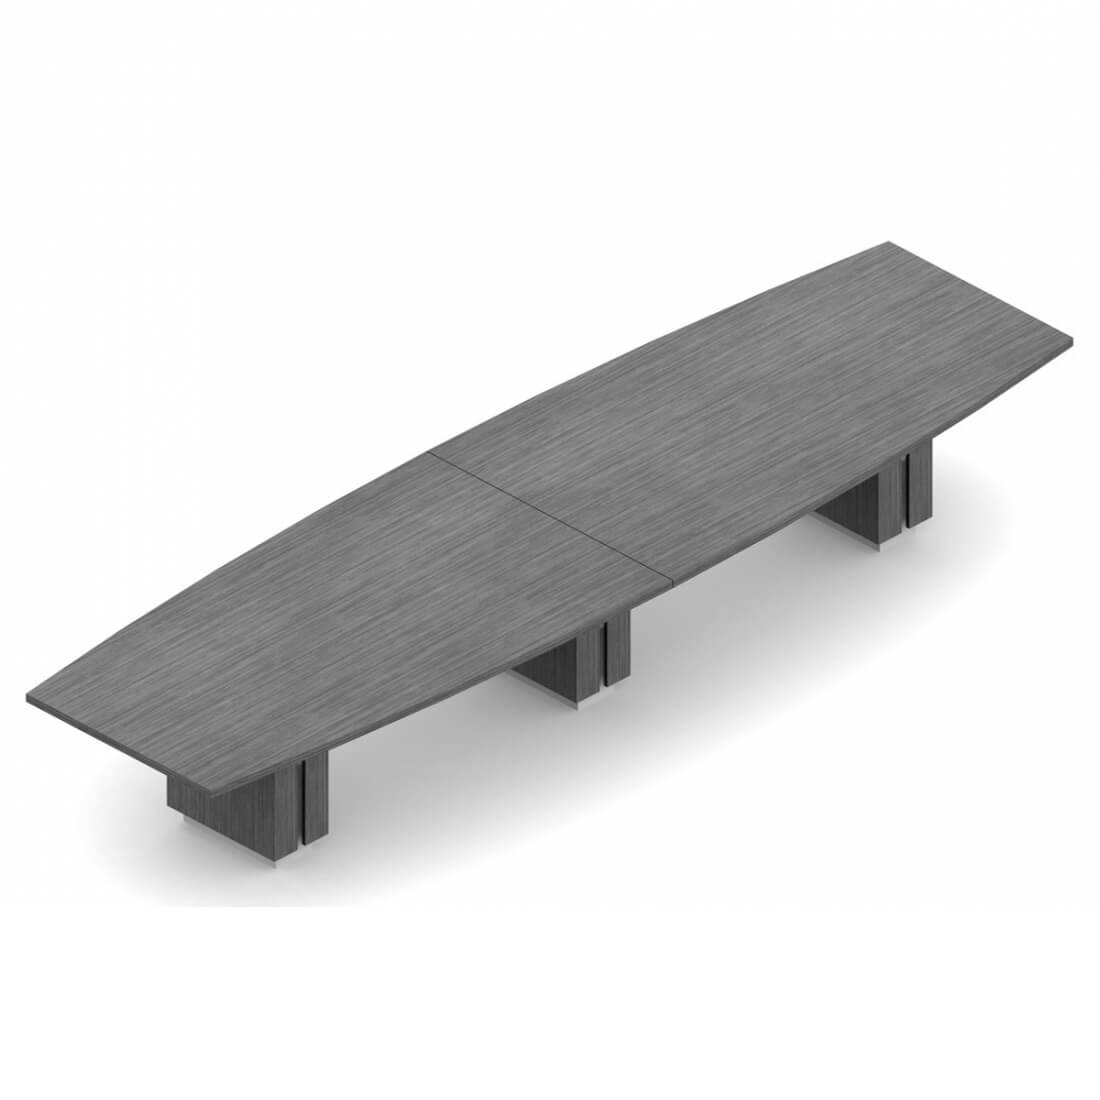 Conference table 14 foot